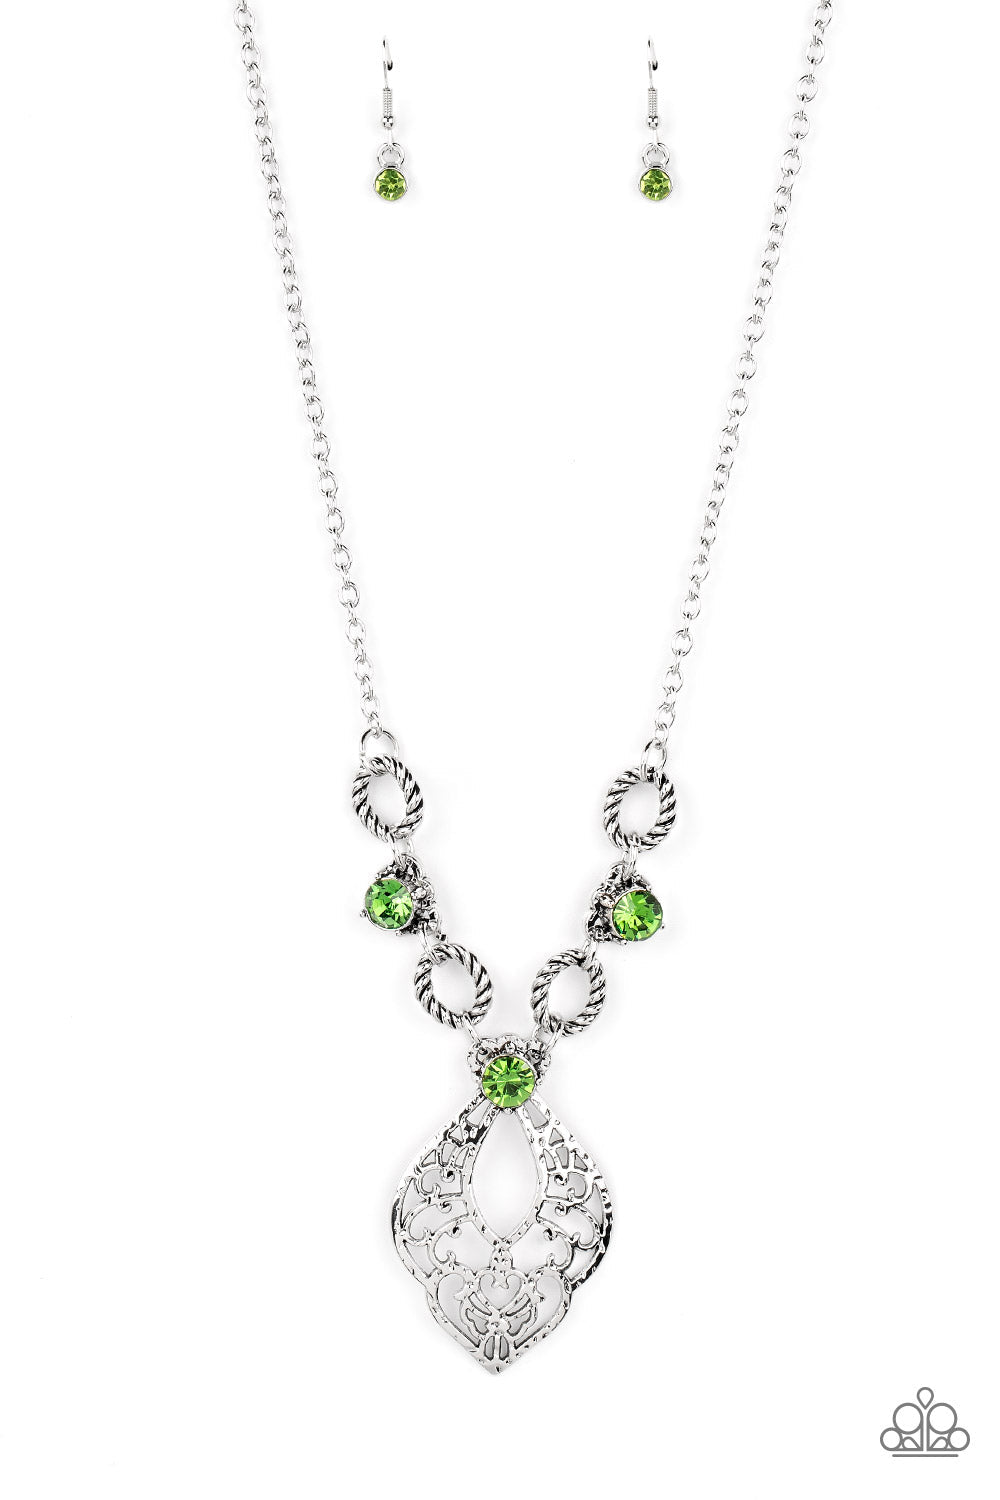 Contemporary Connections - Green and Silver Necklace - Paparazzi Accessories - Twisted silver links and oversized green rhinestones delicately alternate below the collar. A hammered filigree filled silver pendant shimmers from the bottom of the centermost rhinestone, creating a contemporary pendant. Features an adjustable clasp closure.